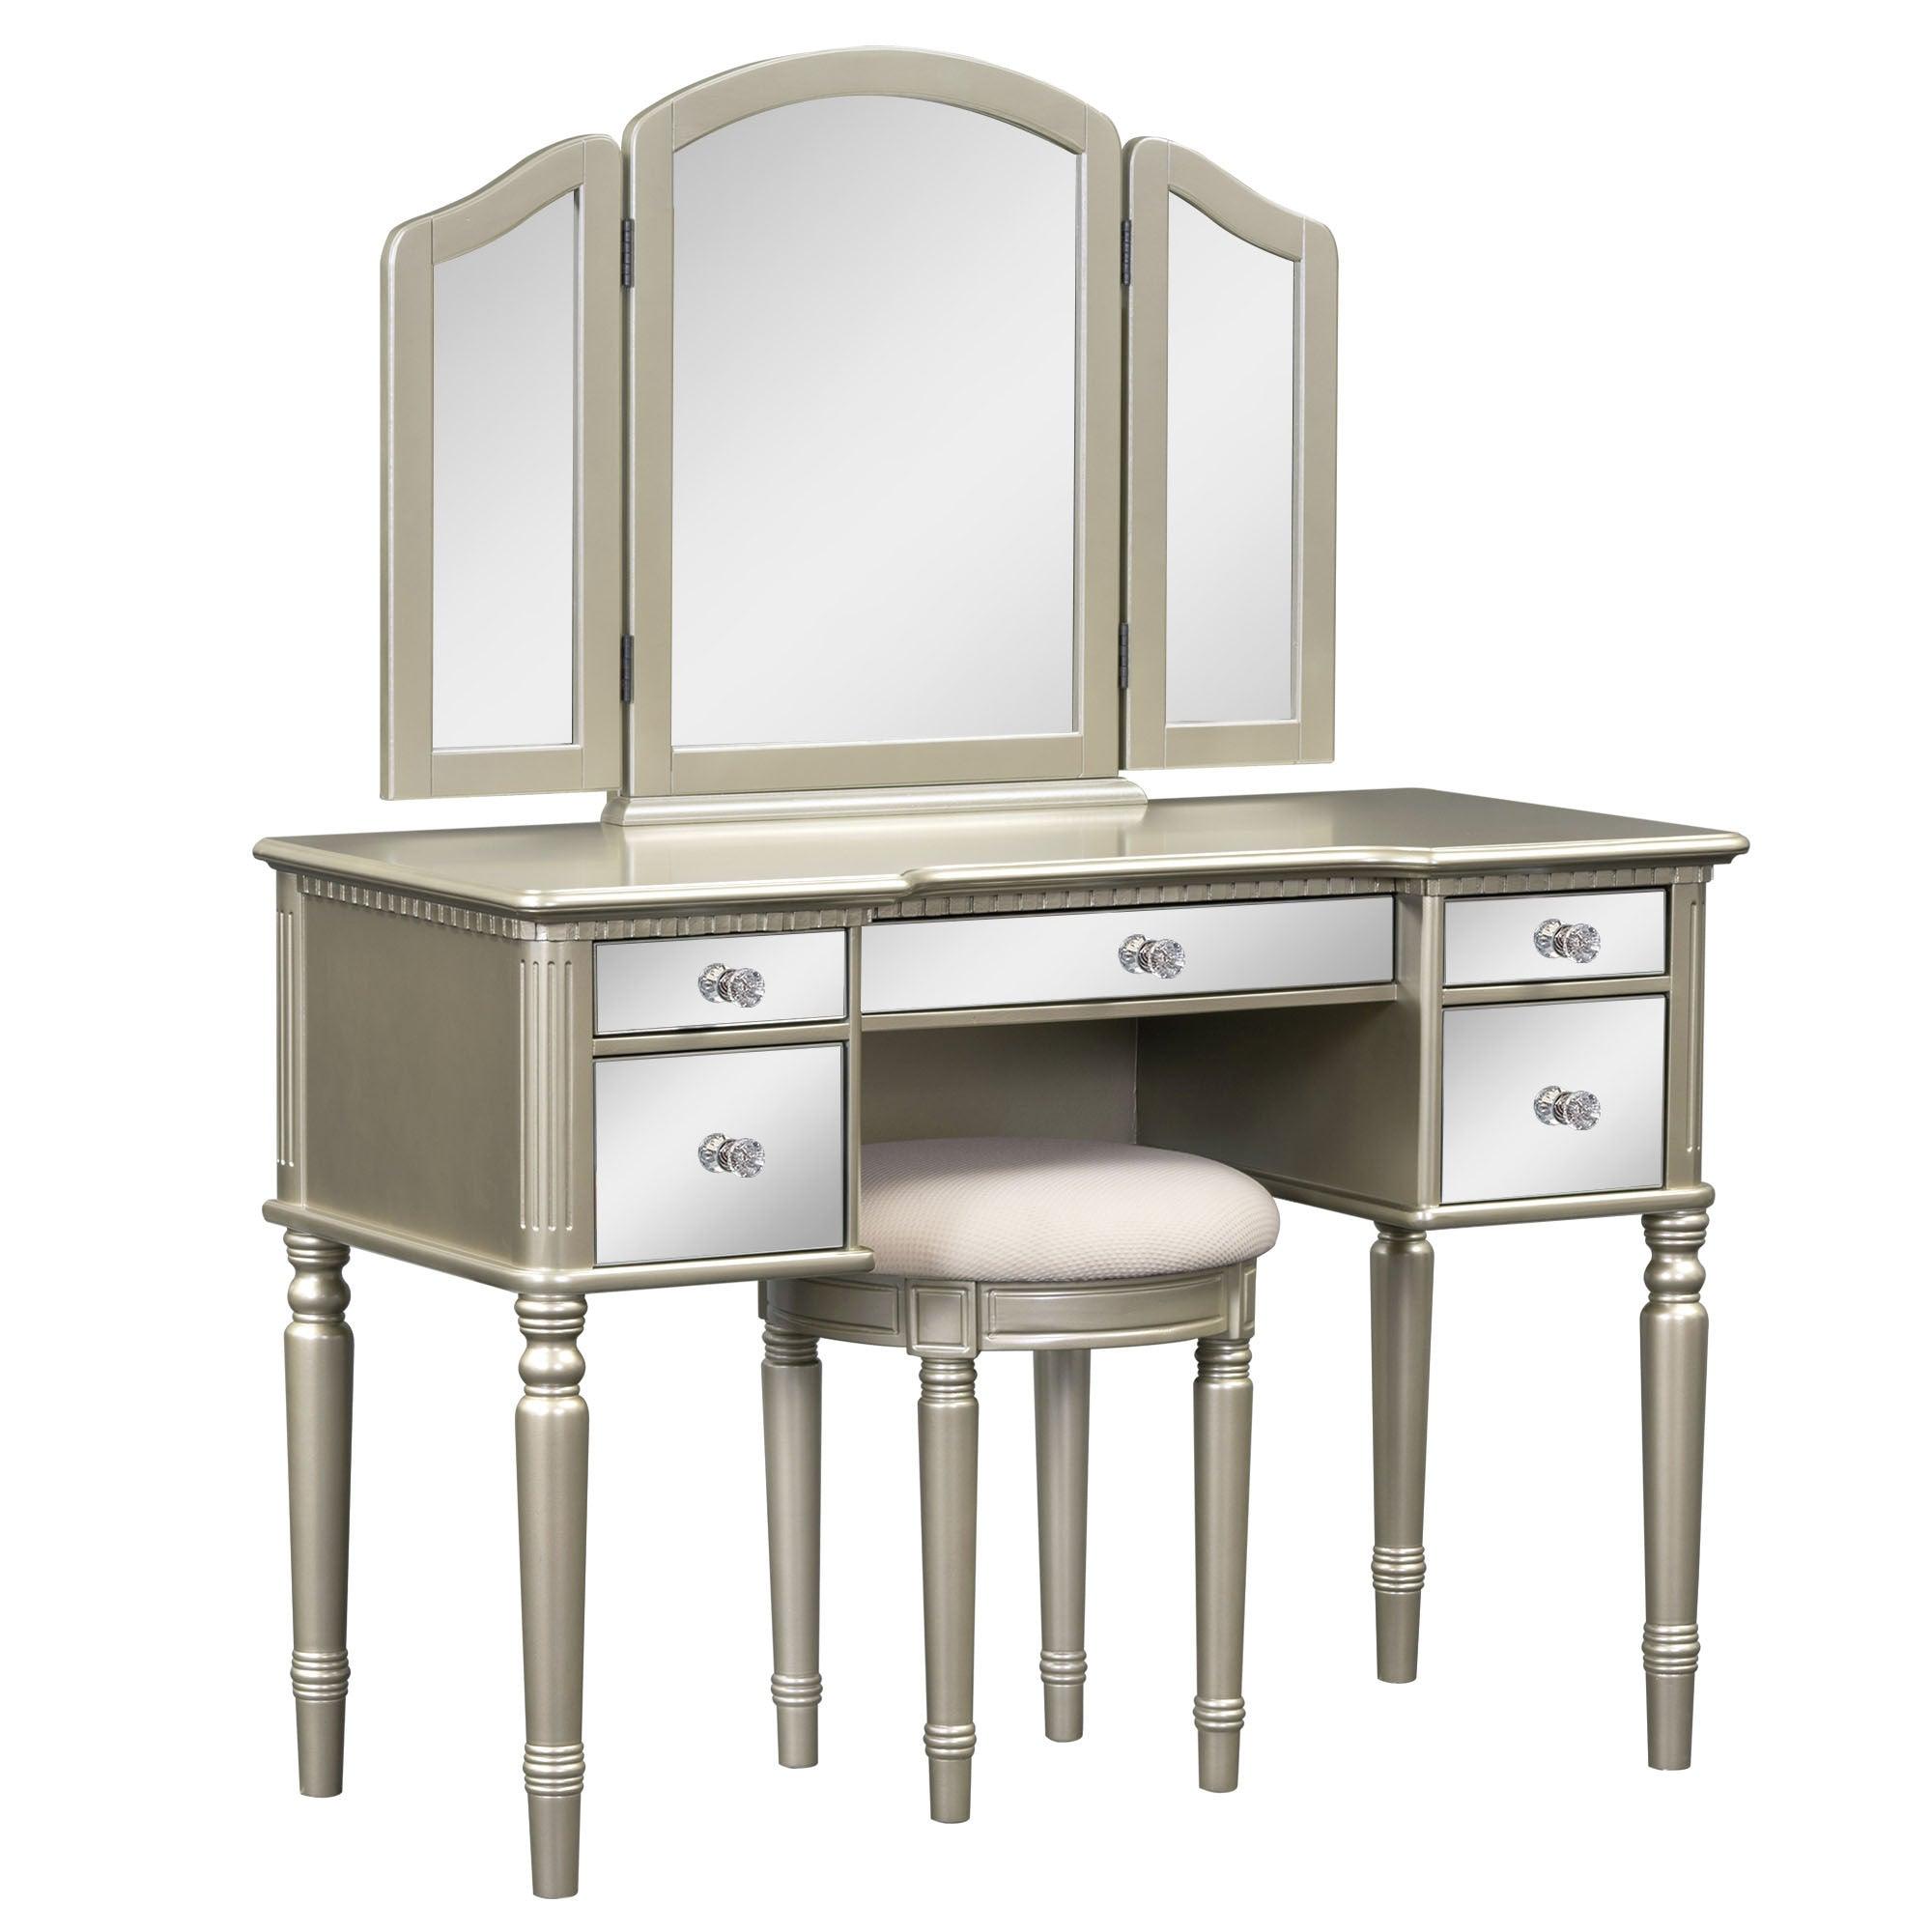 43" Dressing Table Set with Mirrored Drawers and Stool, Tri-fold Mirror, Makeup Vanity Set for Bedroom, Gold